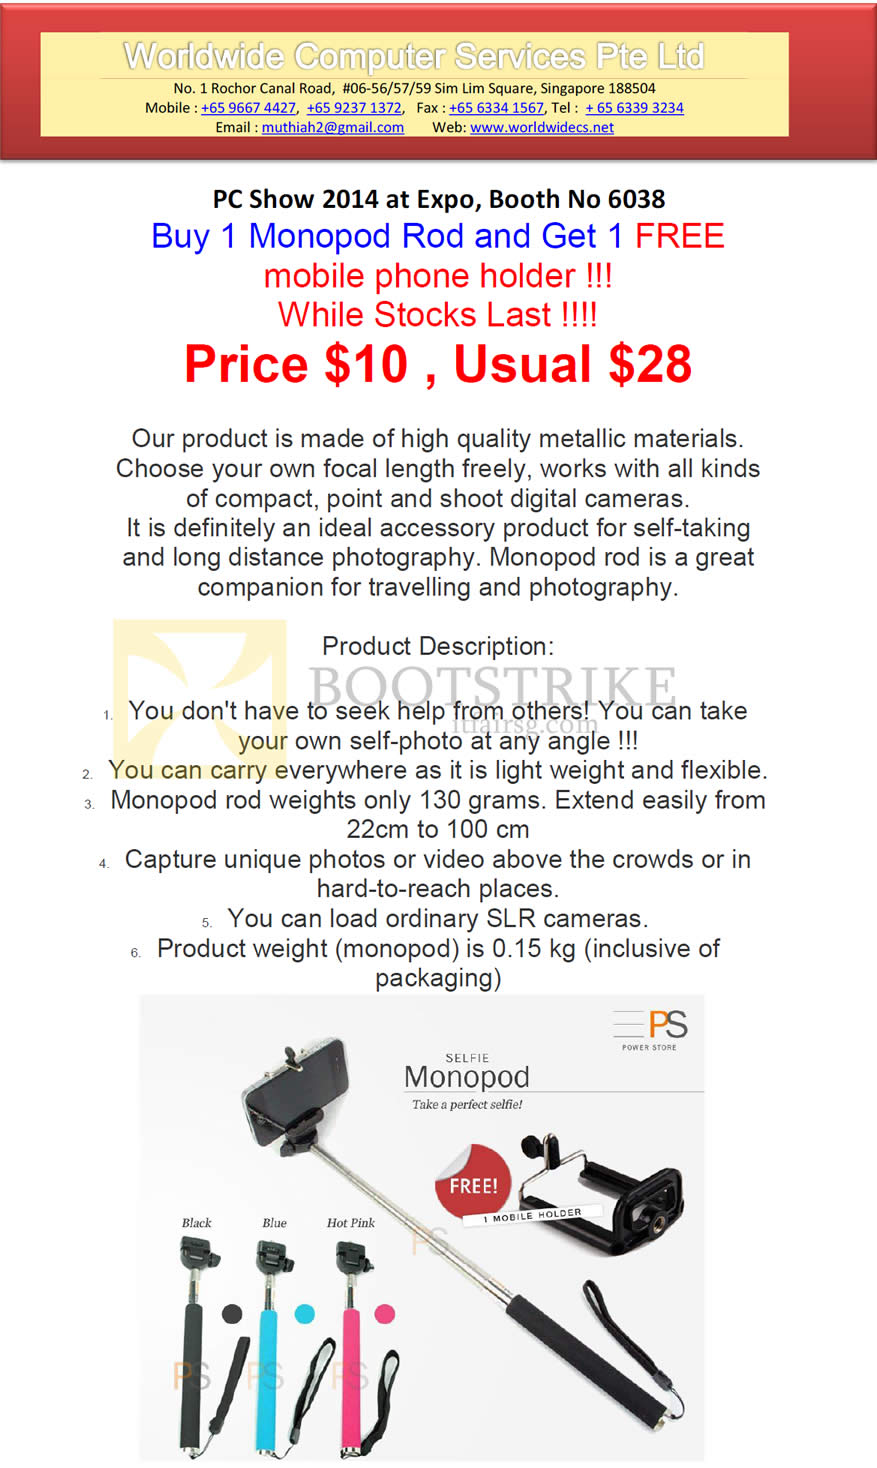 PC SHOW 2014 price list image brochure of Worldwide Computer Services Monopod Rod